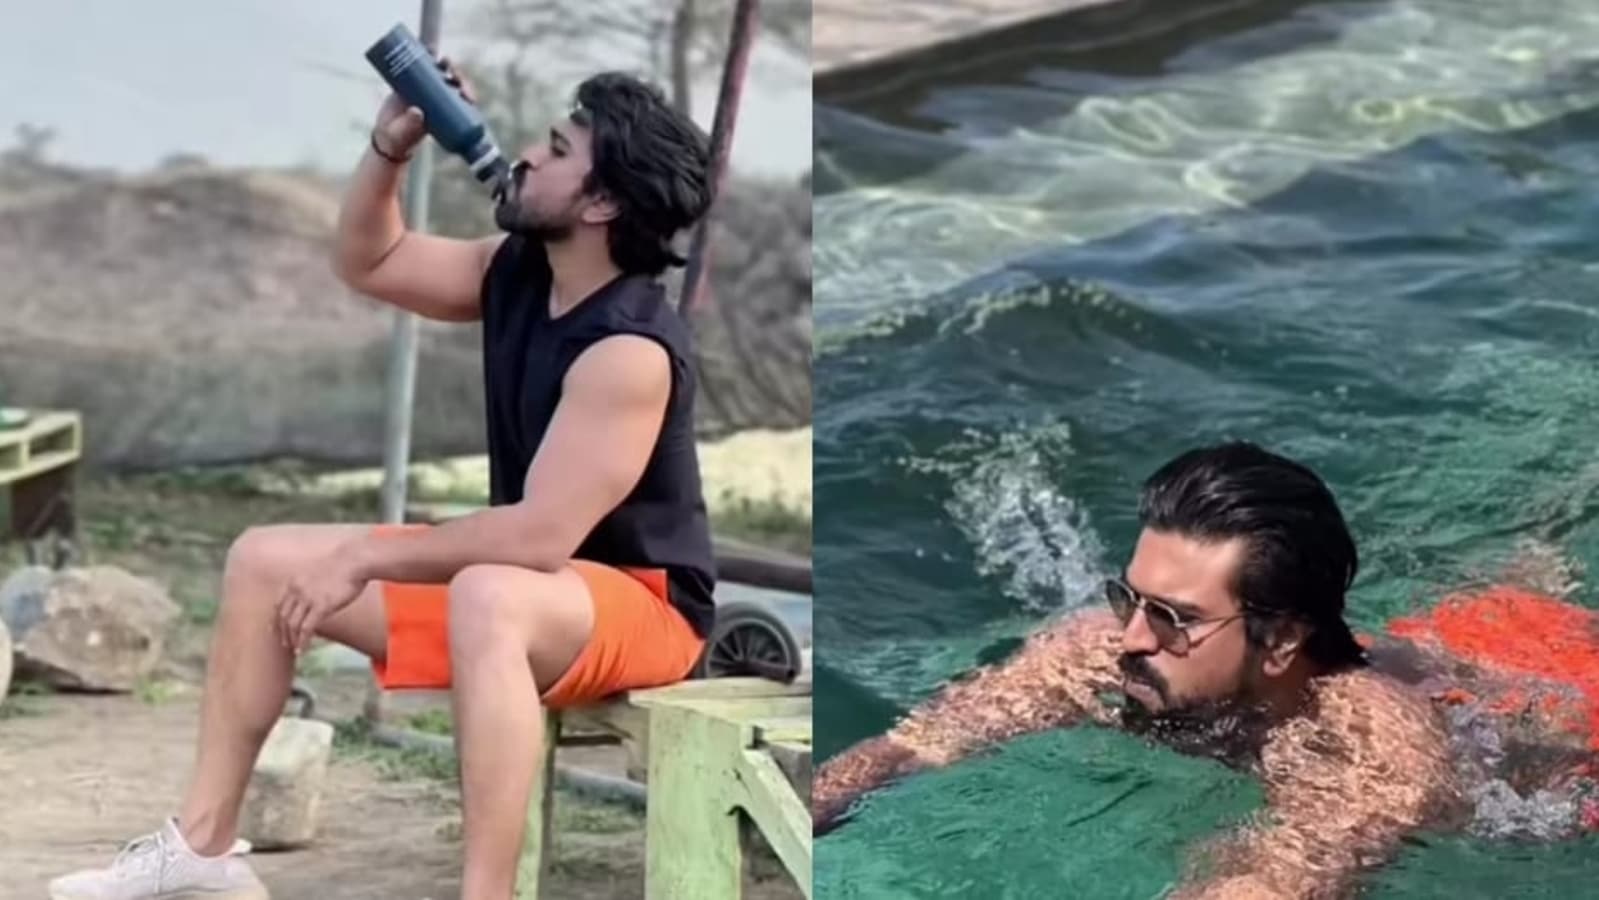 Ram Charan works out in outdoor gym on Africa holiday, fans love ...